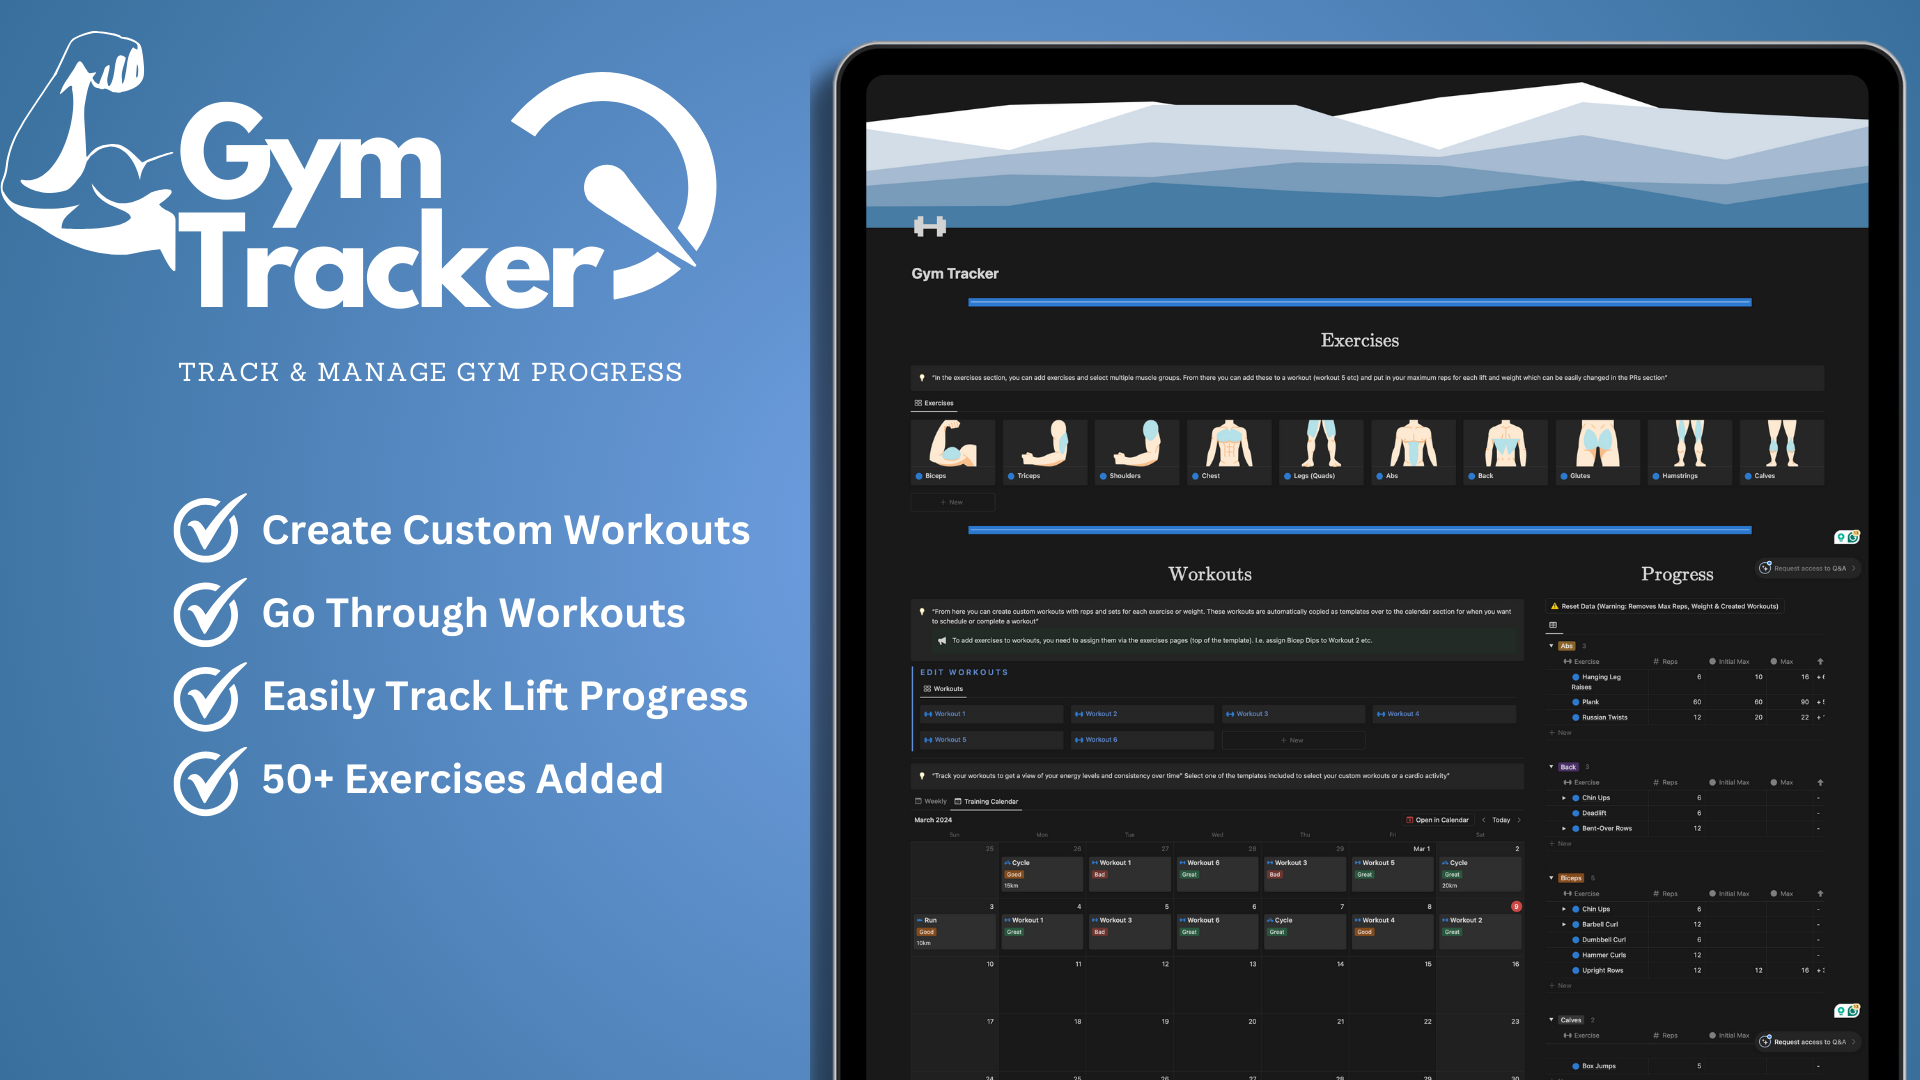 Gym Tracker allows you to create custom workouts by adding pre-made exercises with reps, sets & weights. Use the calendar to schedule and complete workouts.

Gym tracker also allows you to track your lifts to see your progress in each exercise over time.